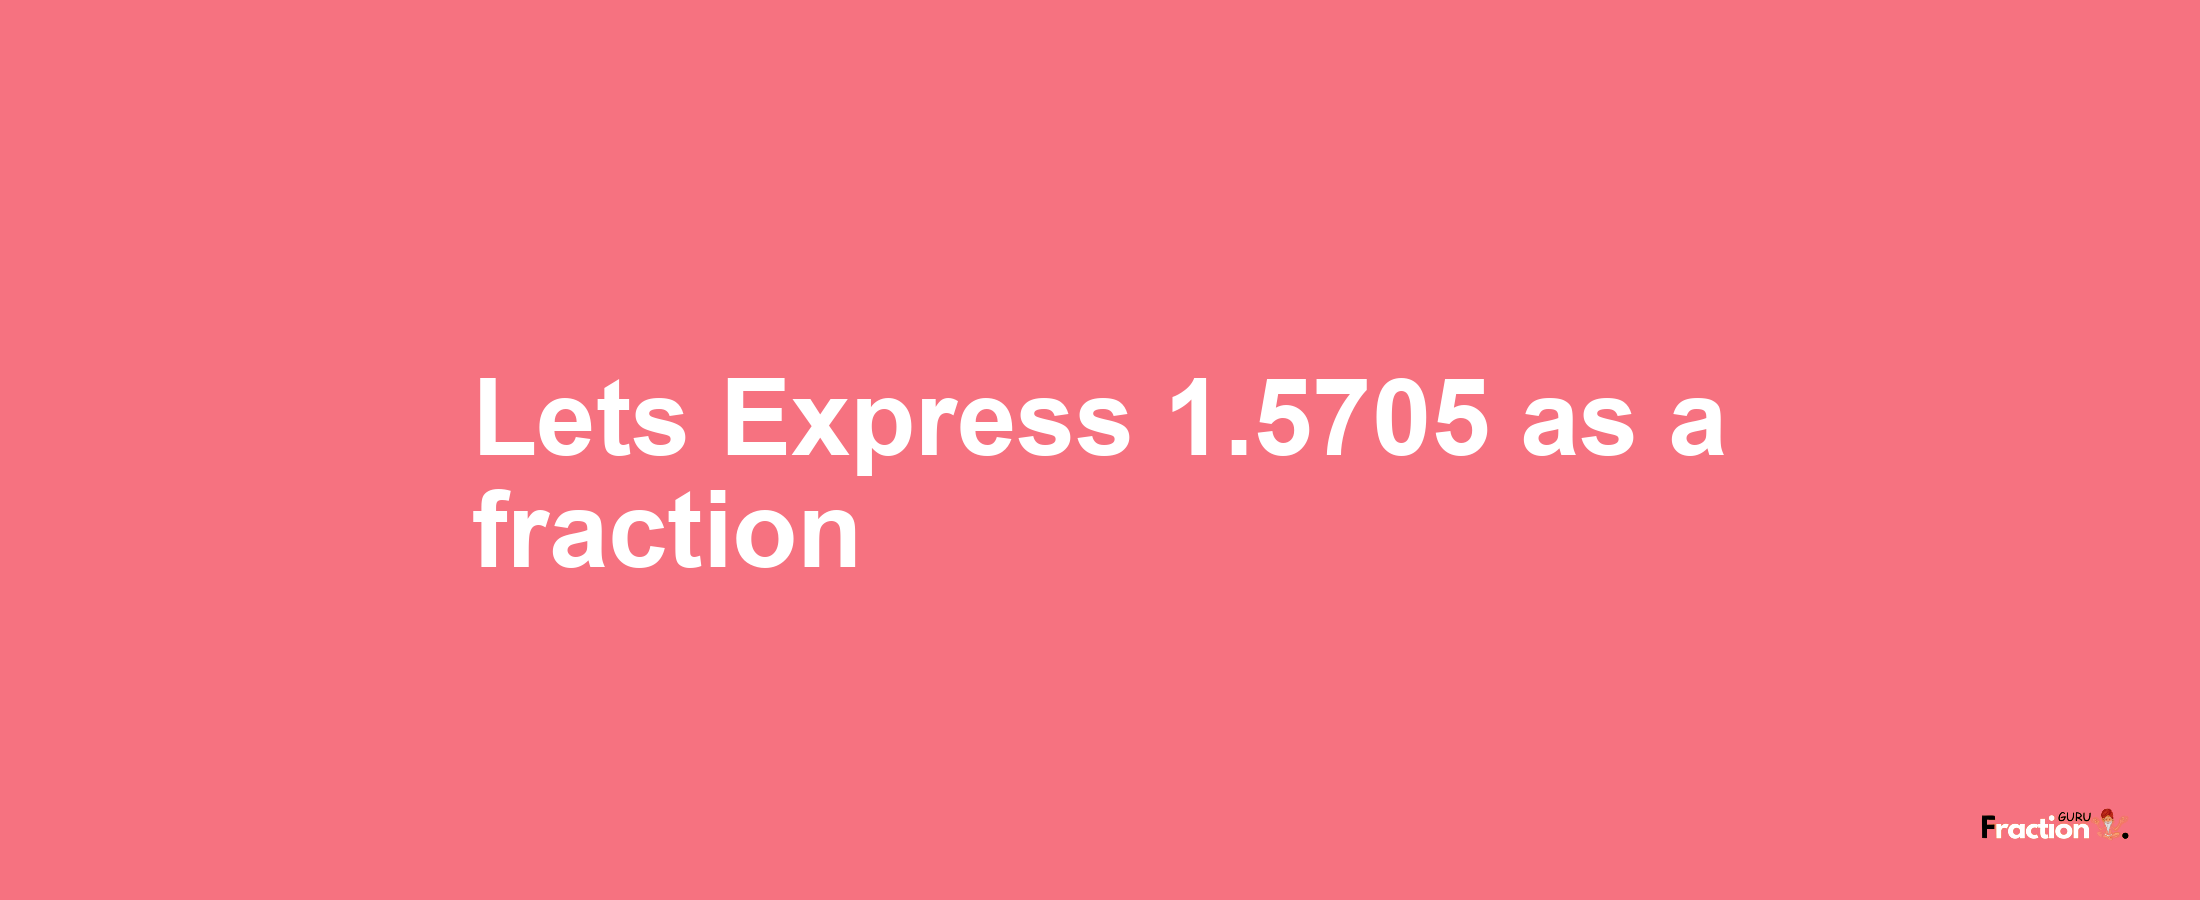 Lets Express 1.5705 as afraction